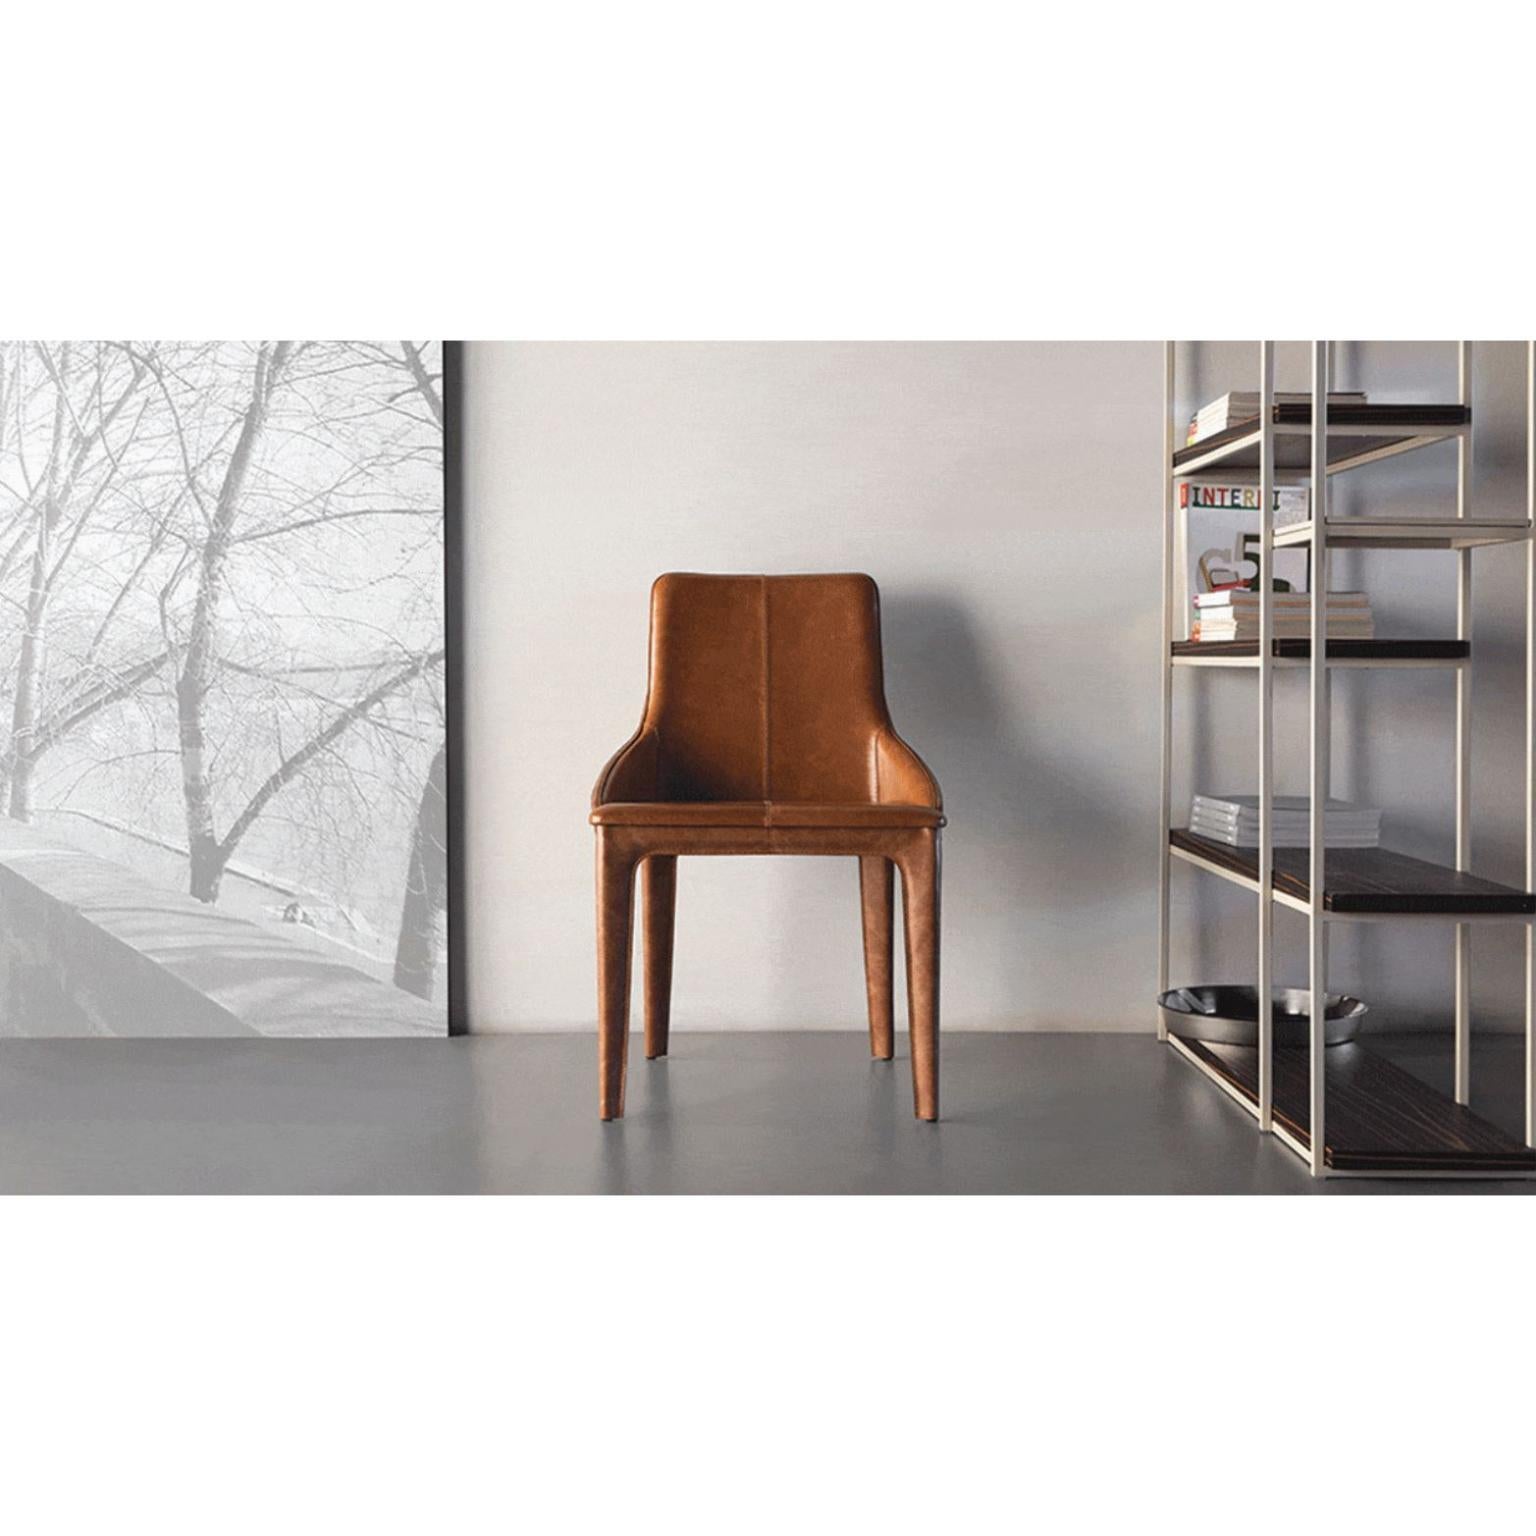 Ola Chair by Doimo Brasil
Dimensions: W 55 x D 57 x H 83 cm 
Materials: Metal, upholstered seat. 


With the intention of providing good taste and personality, Doimo deciphers trends and follows the evolution of man and his space. To this end, it